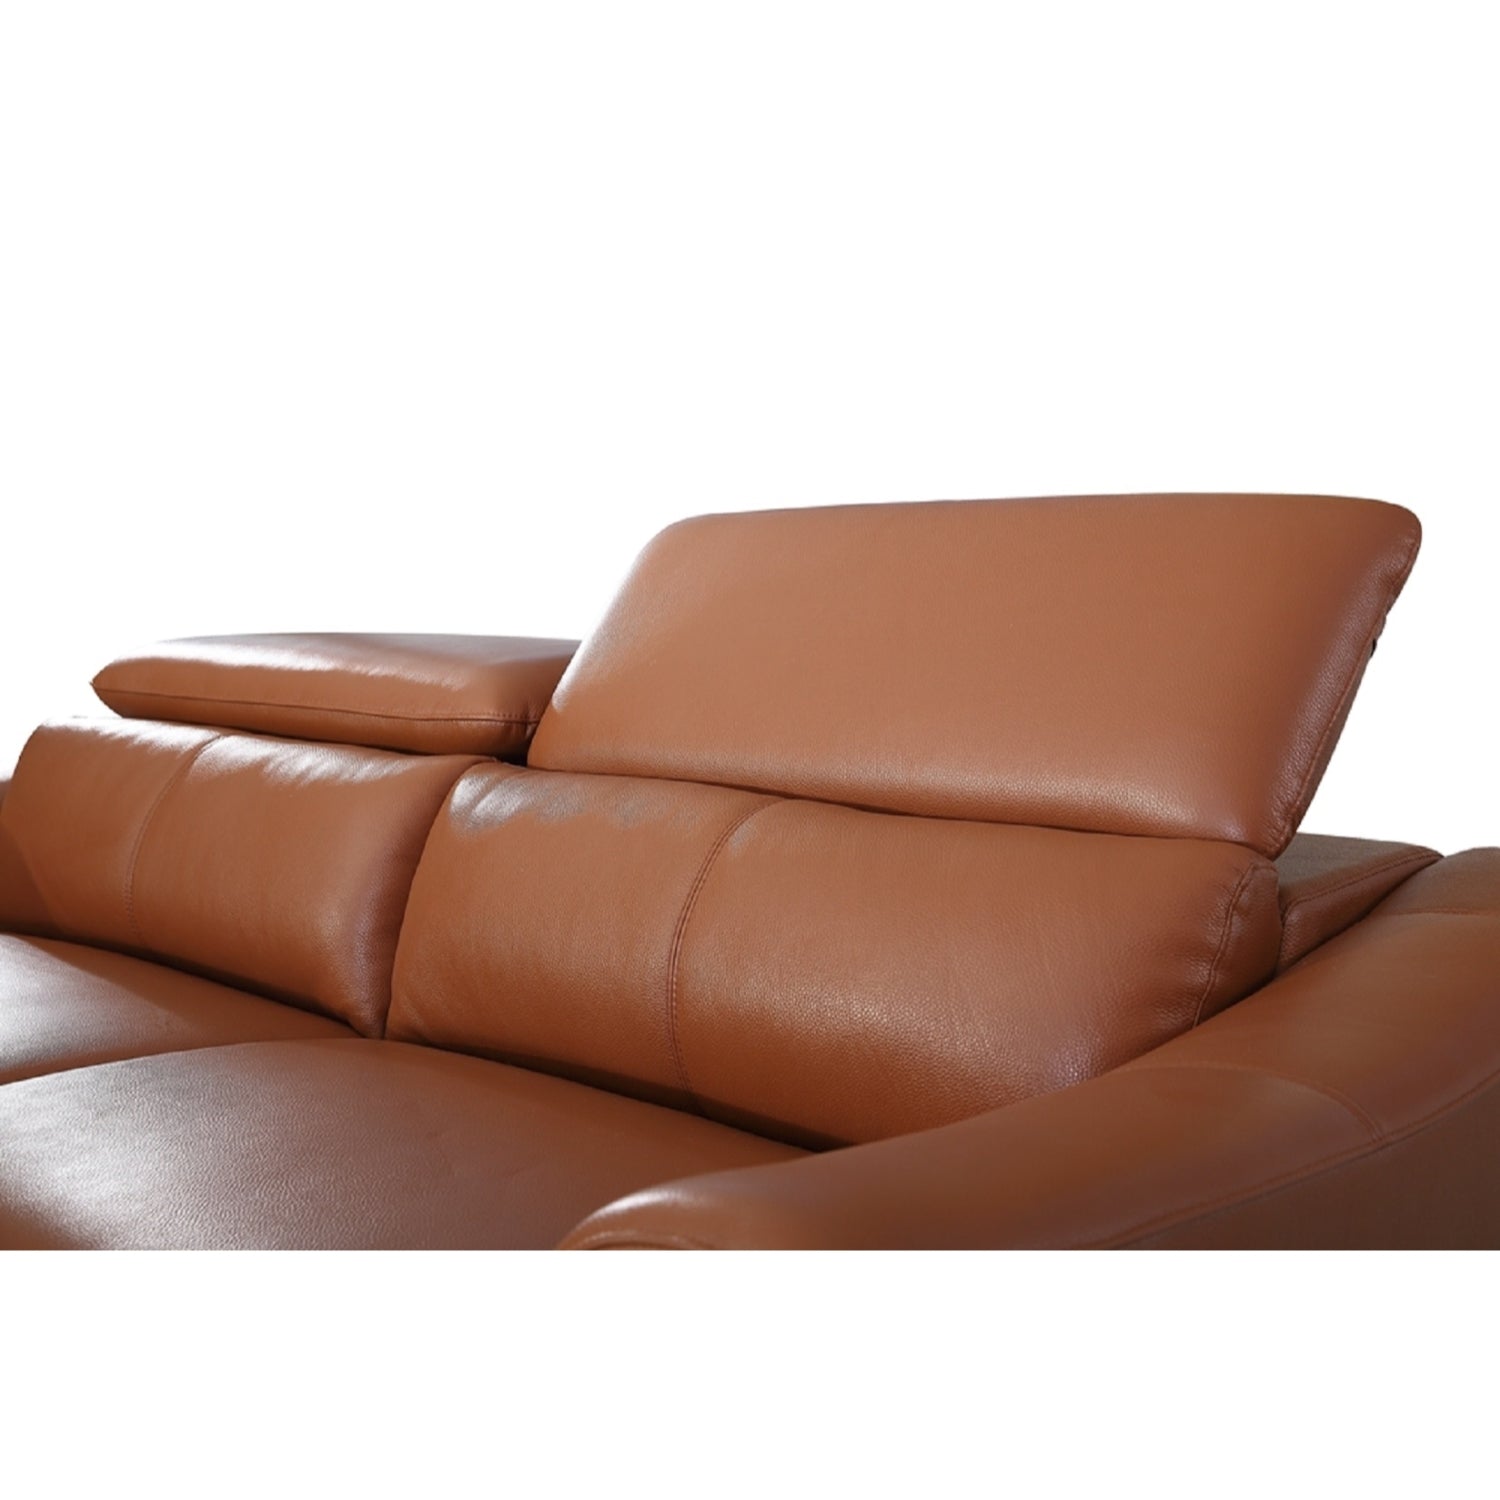 ViscoLogic DUKE Adjustable Headrest Luxury Living Room Leather Sofa/Couch, Loveseat, Arm Chair (Brown) (FOR GTA ONLY)